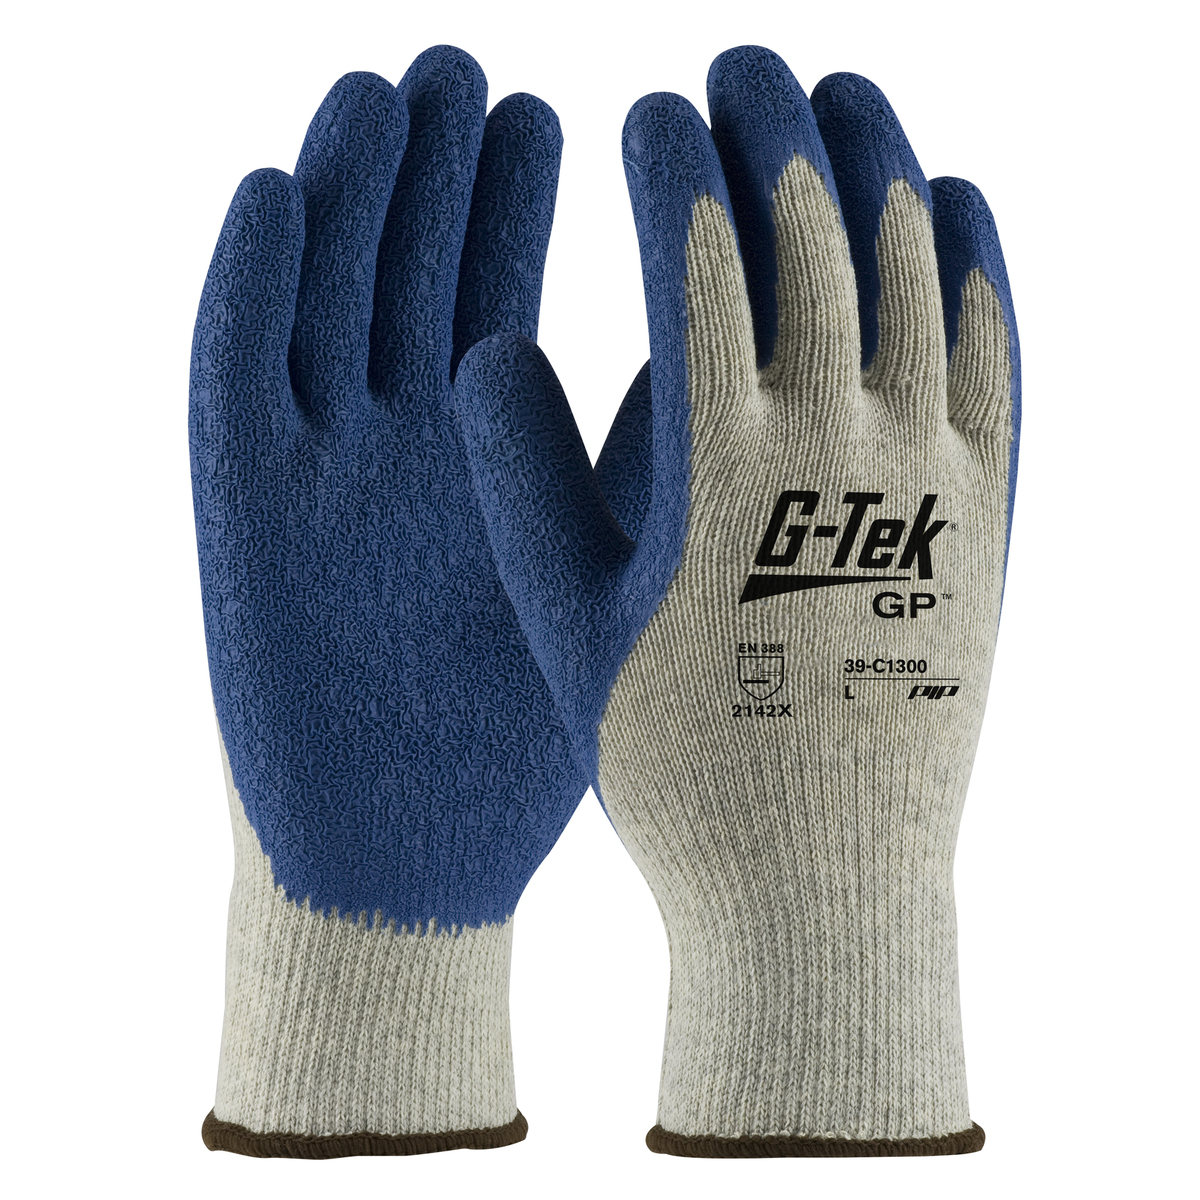 PIP® Medium G-Tek® GP™ 10 Gauge Blue Nitrile Palm And Finger Coated Work Gloves With Cotton Liner And Continuous Knit Wrist